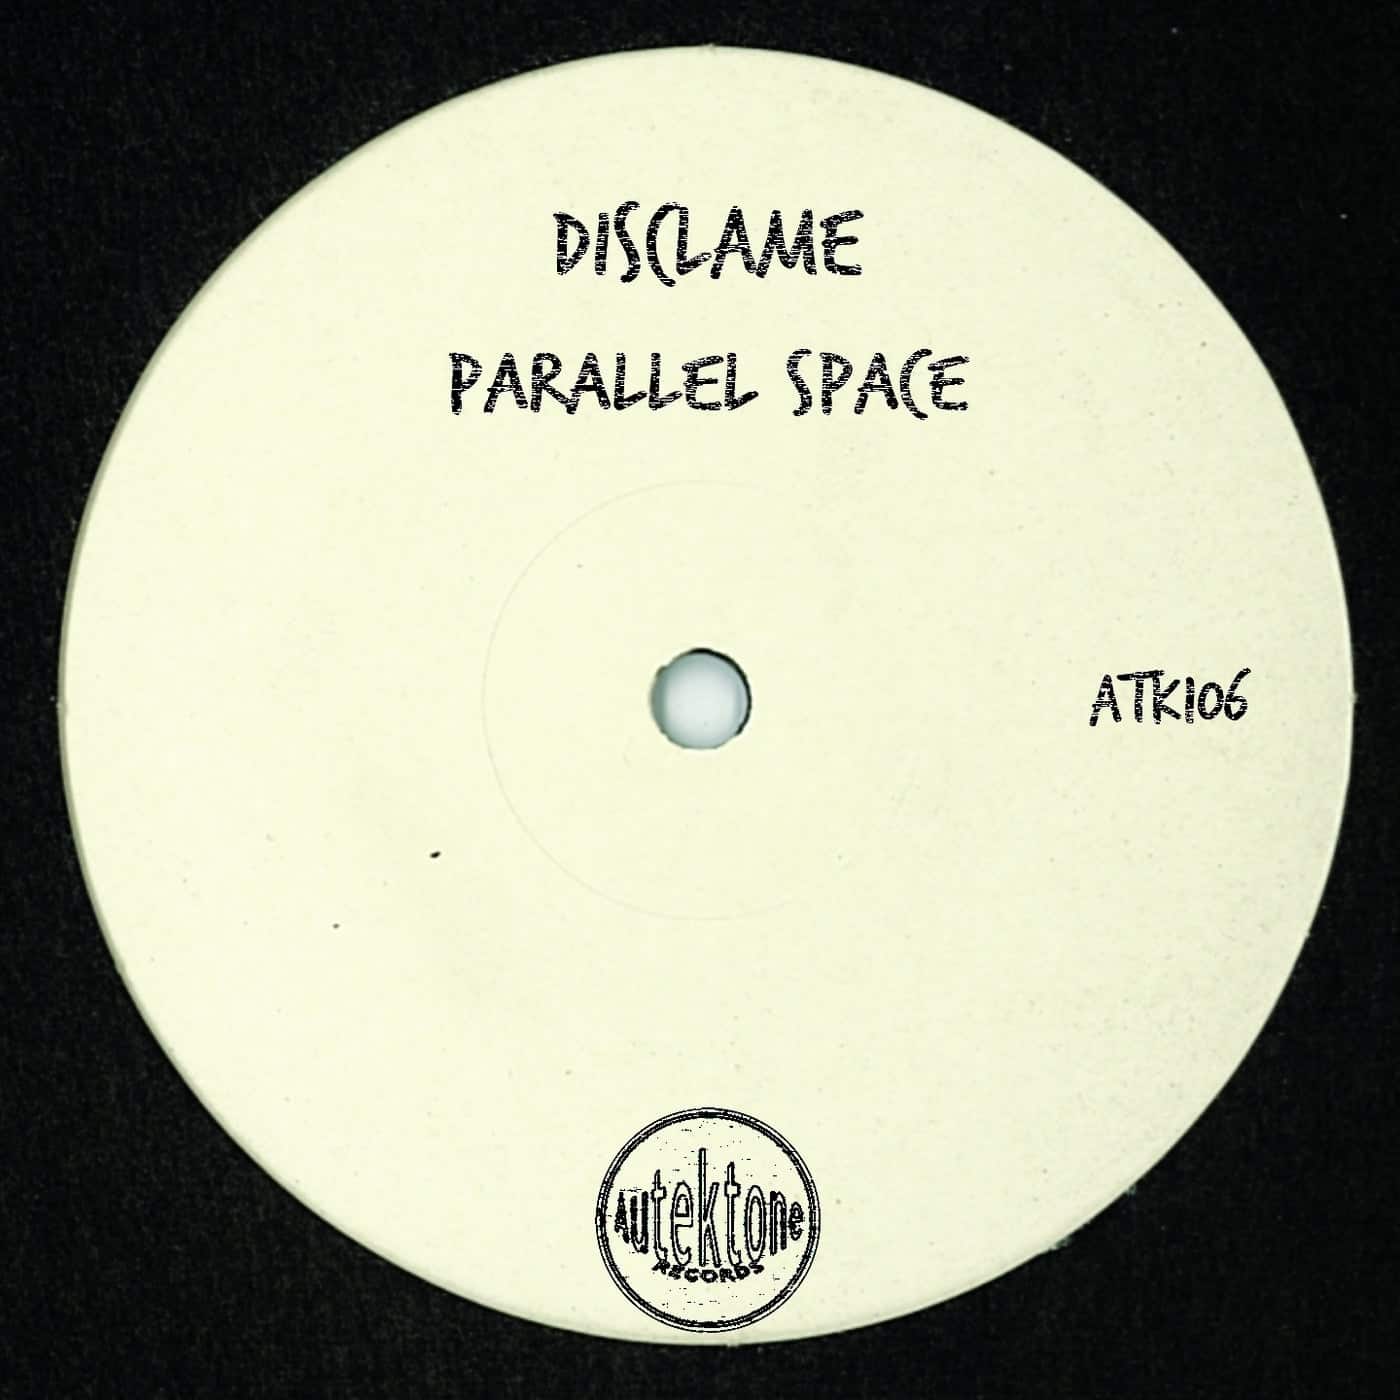 image cover: Disclame - Parallel Space / ATK106